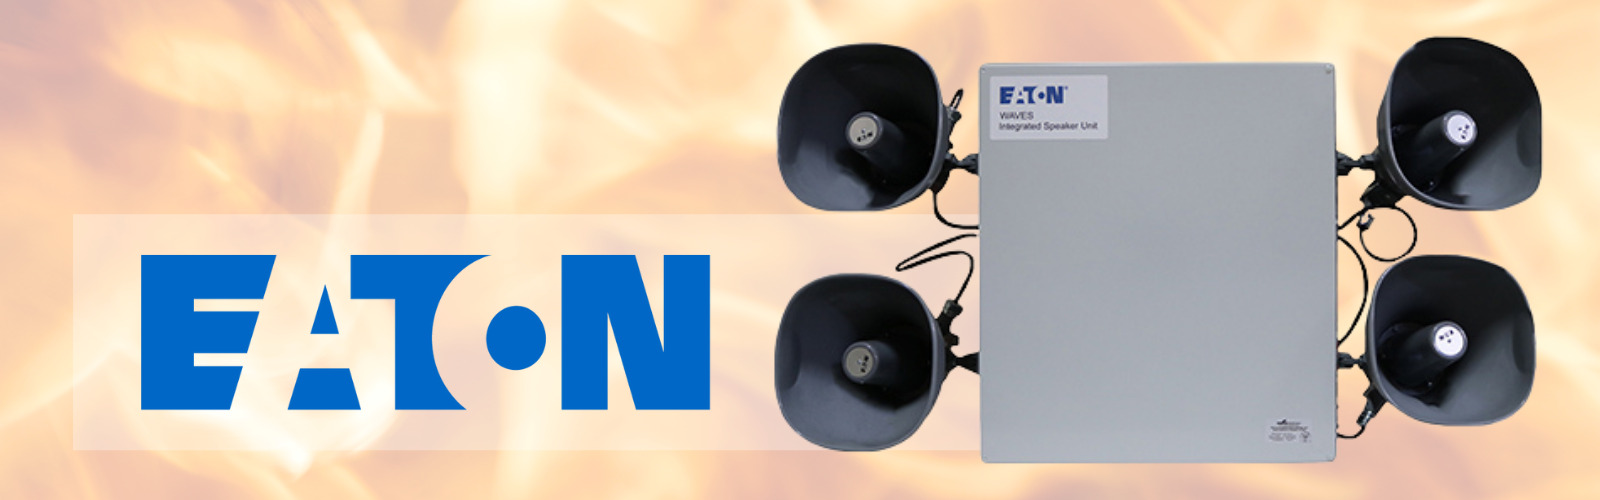 Eaton Mass Notification Systems and Installation